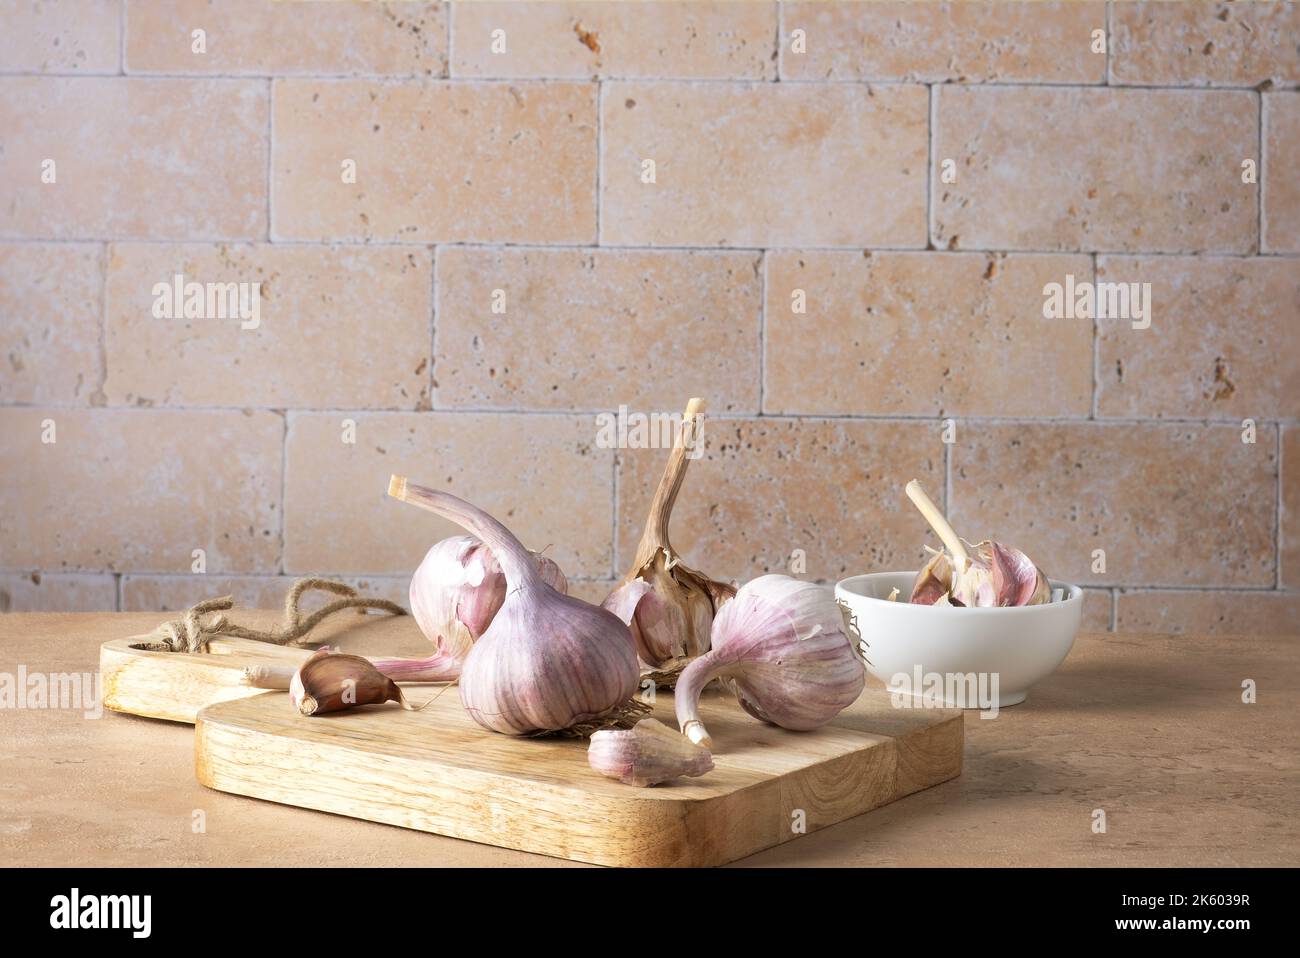 Heads and cloves of garlic lie on a cutting board. Stock Photo